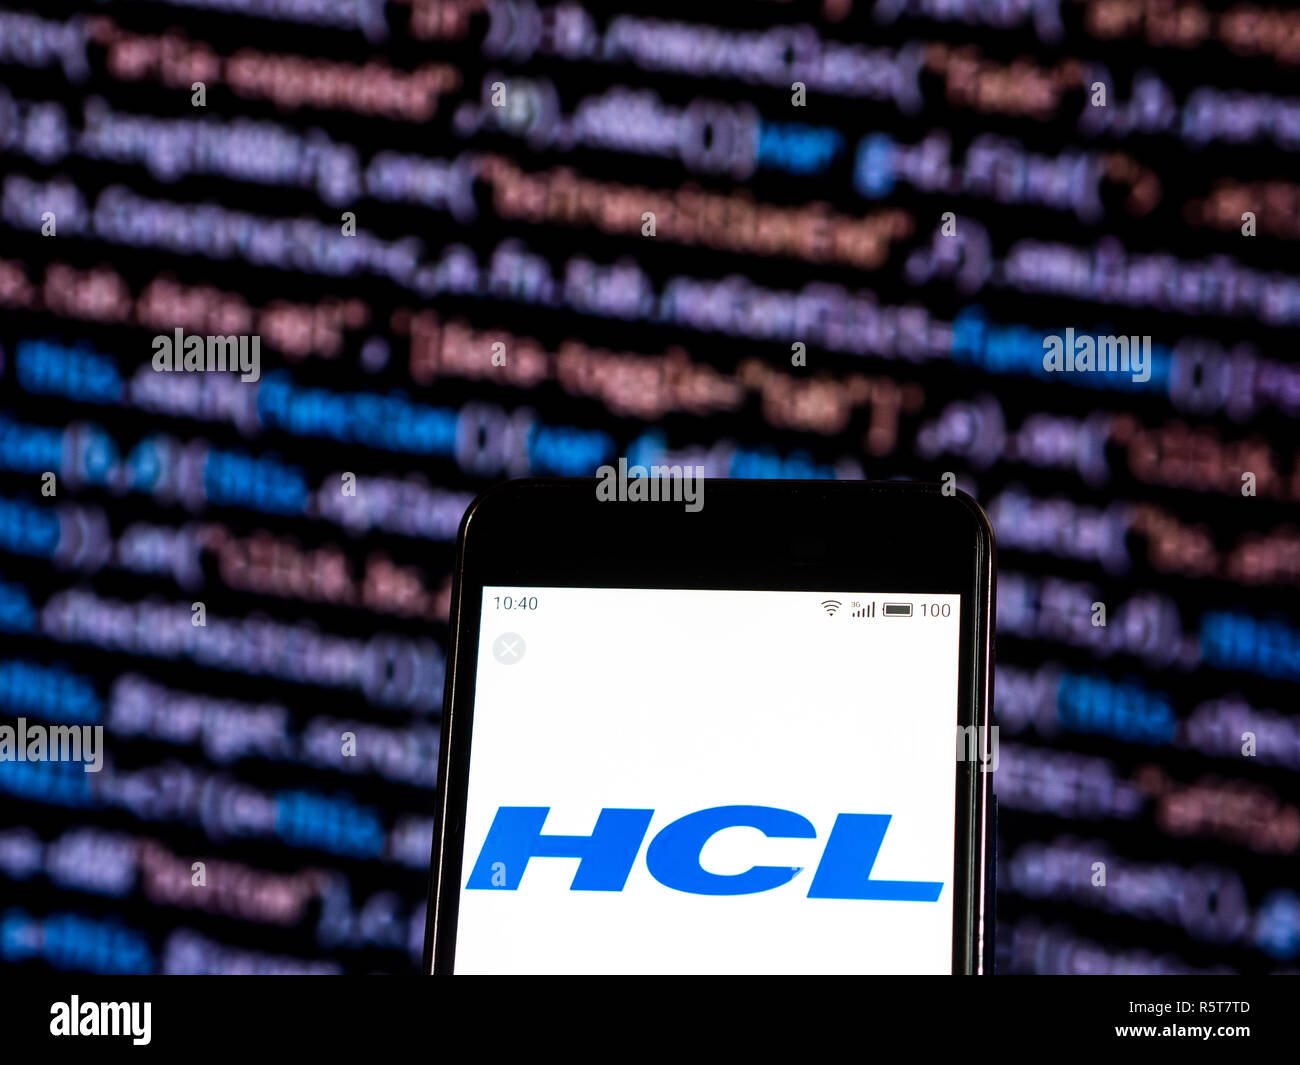 HCL Technologies Software company logo seen displayed on smart phone. Stock Photo